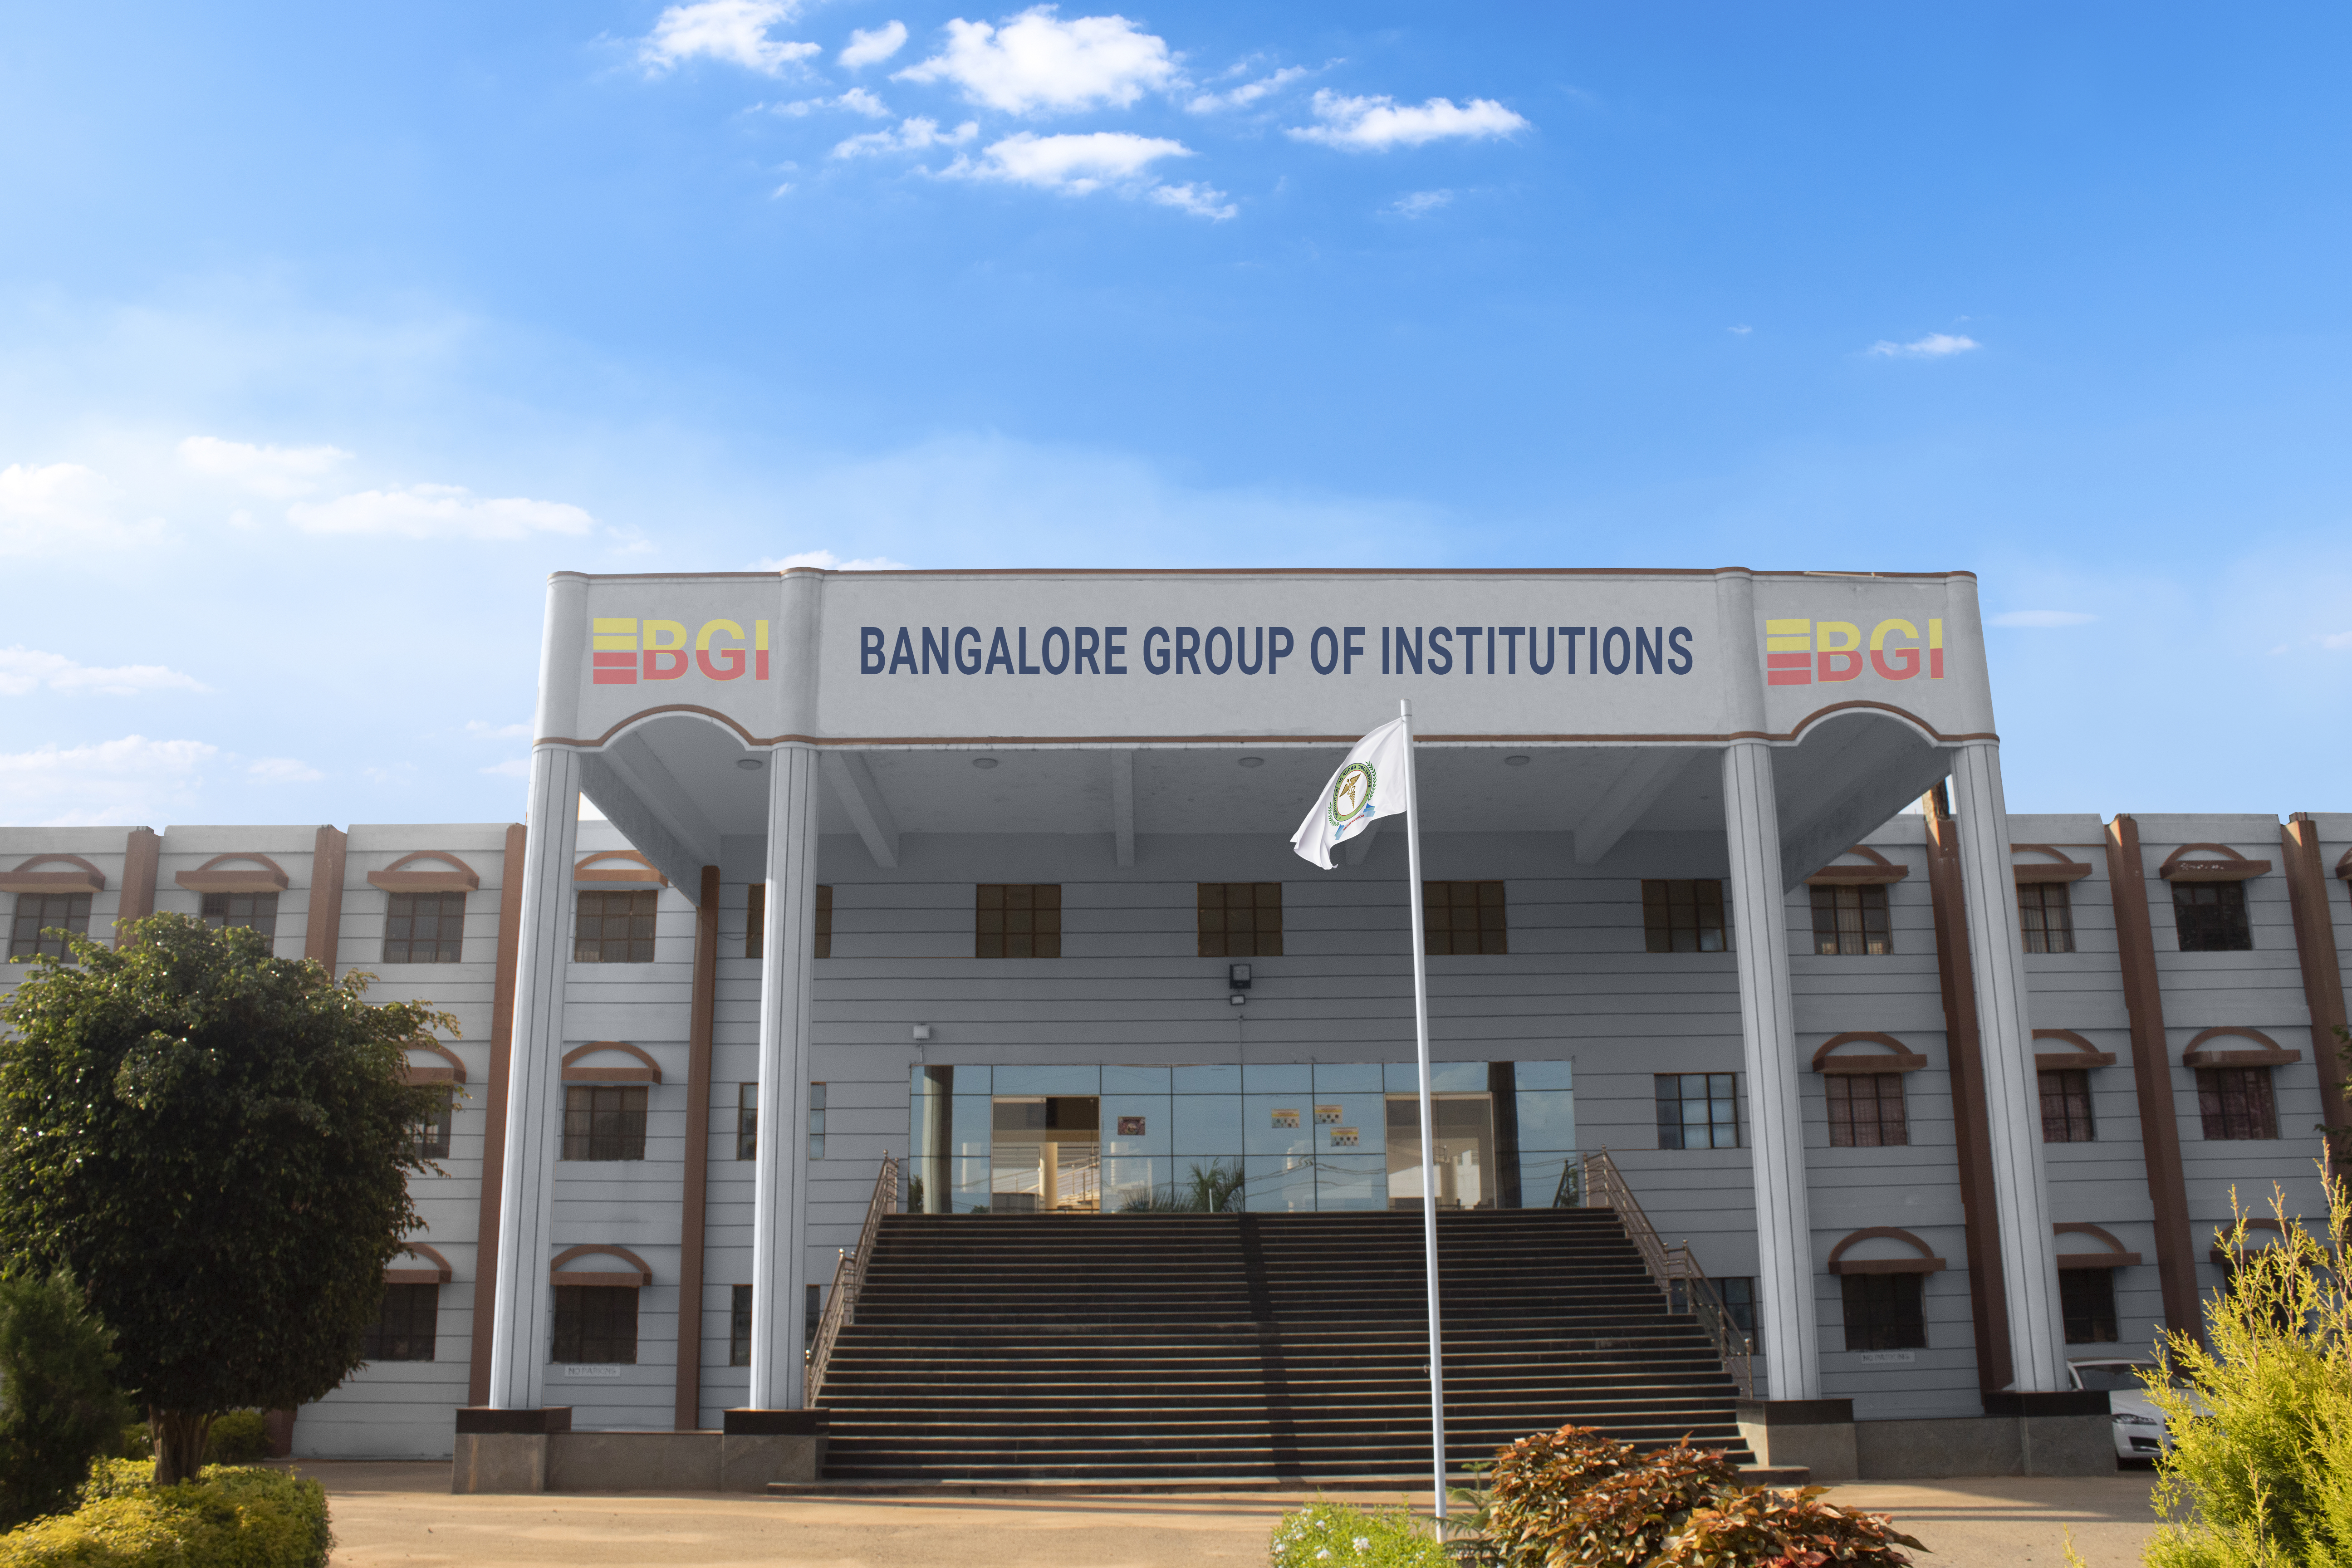 Welcome to Bangalore Group of Institutions